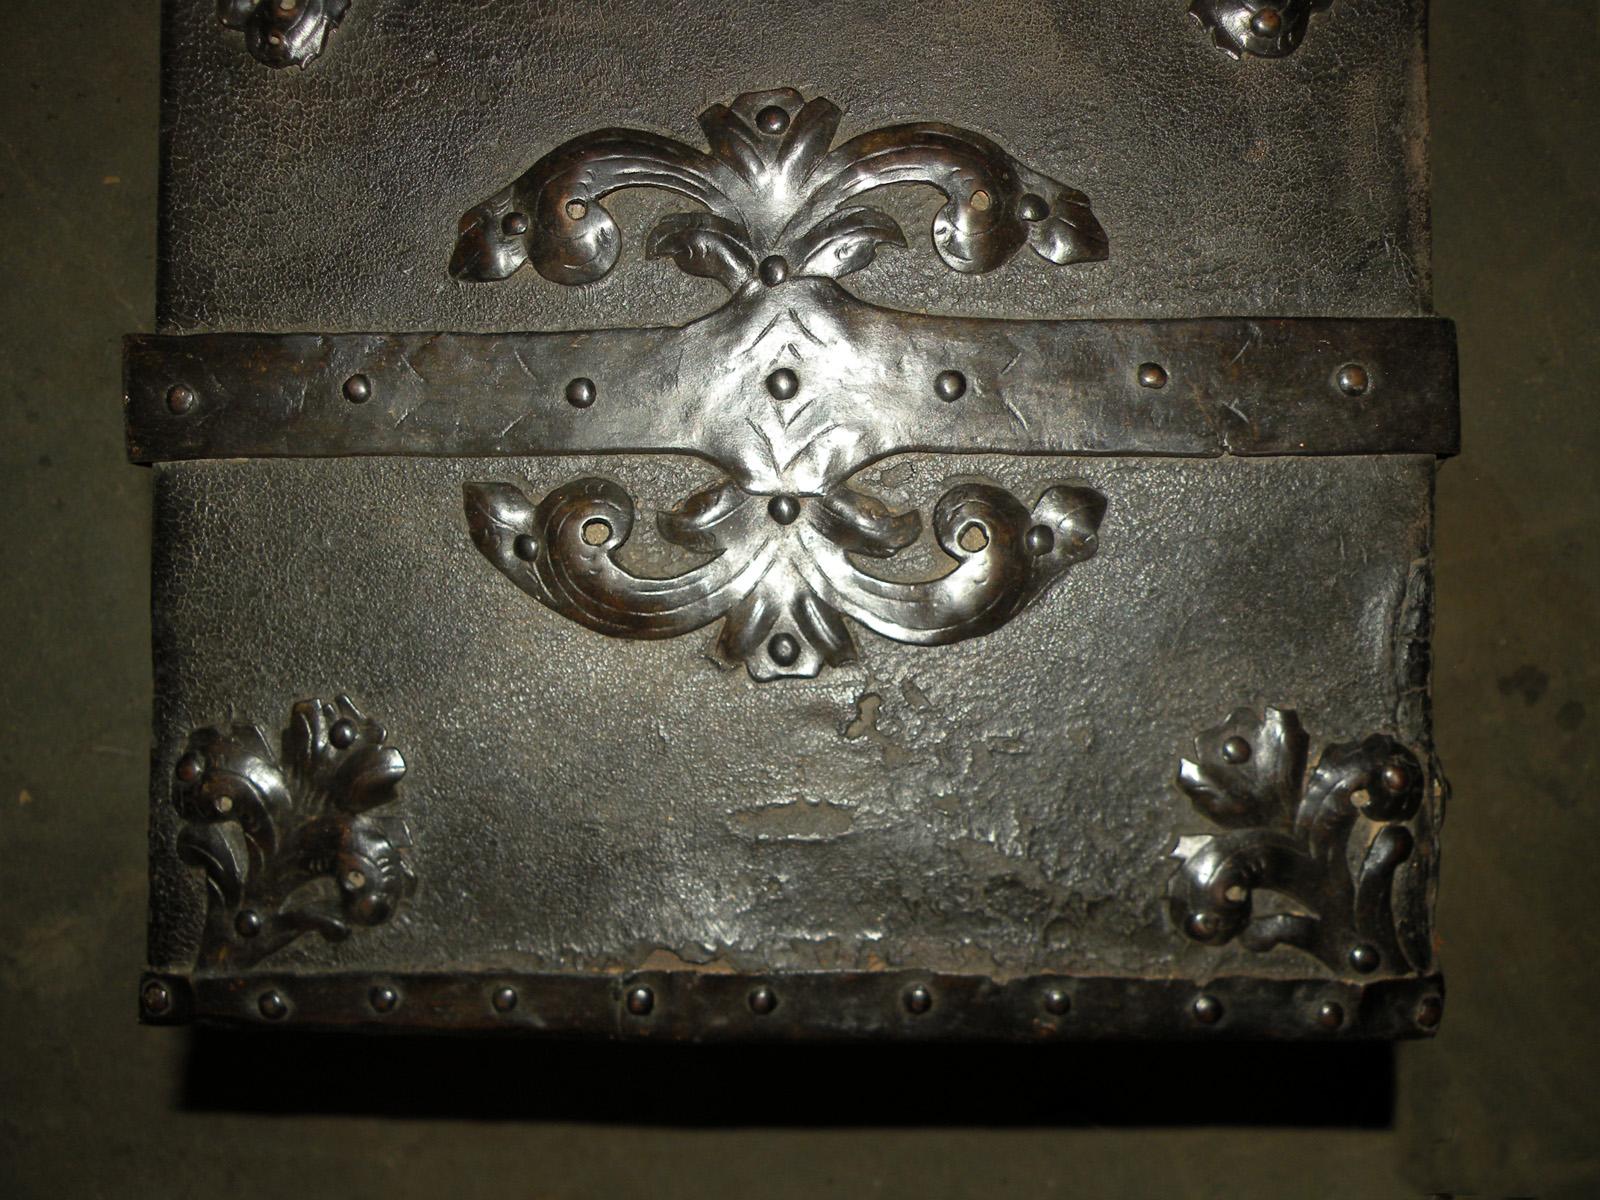 French Baroque 17th Century Iron Bound Leather Chest or Coffer For Sale 3